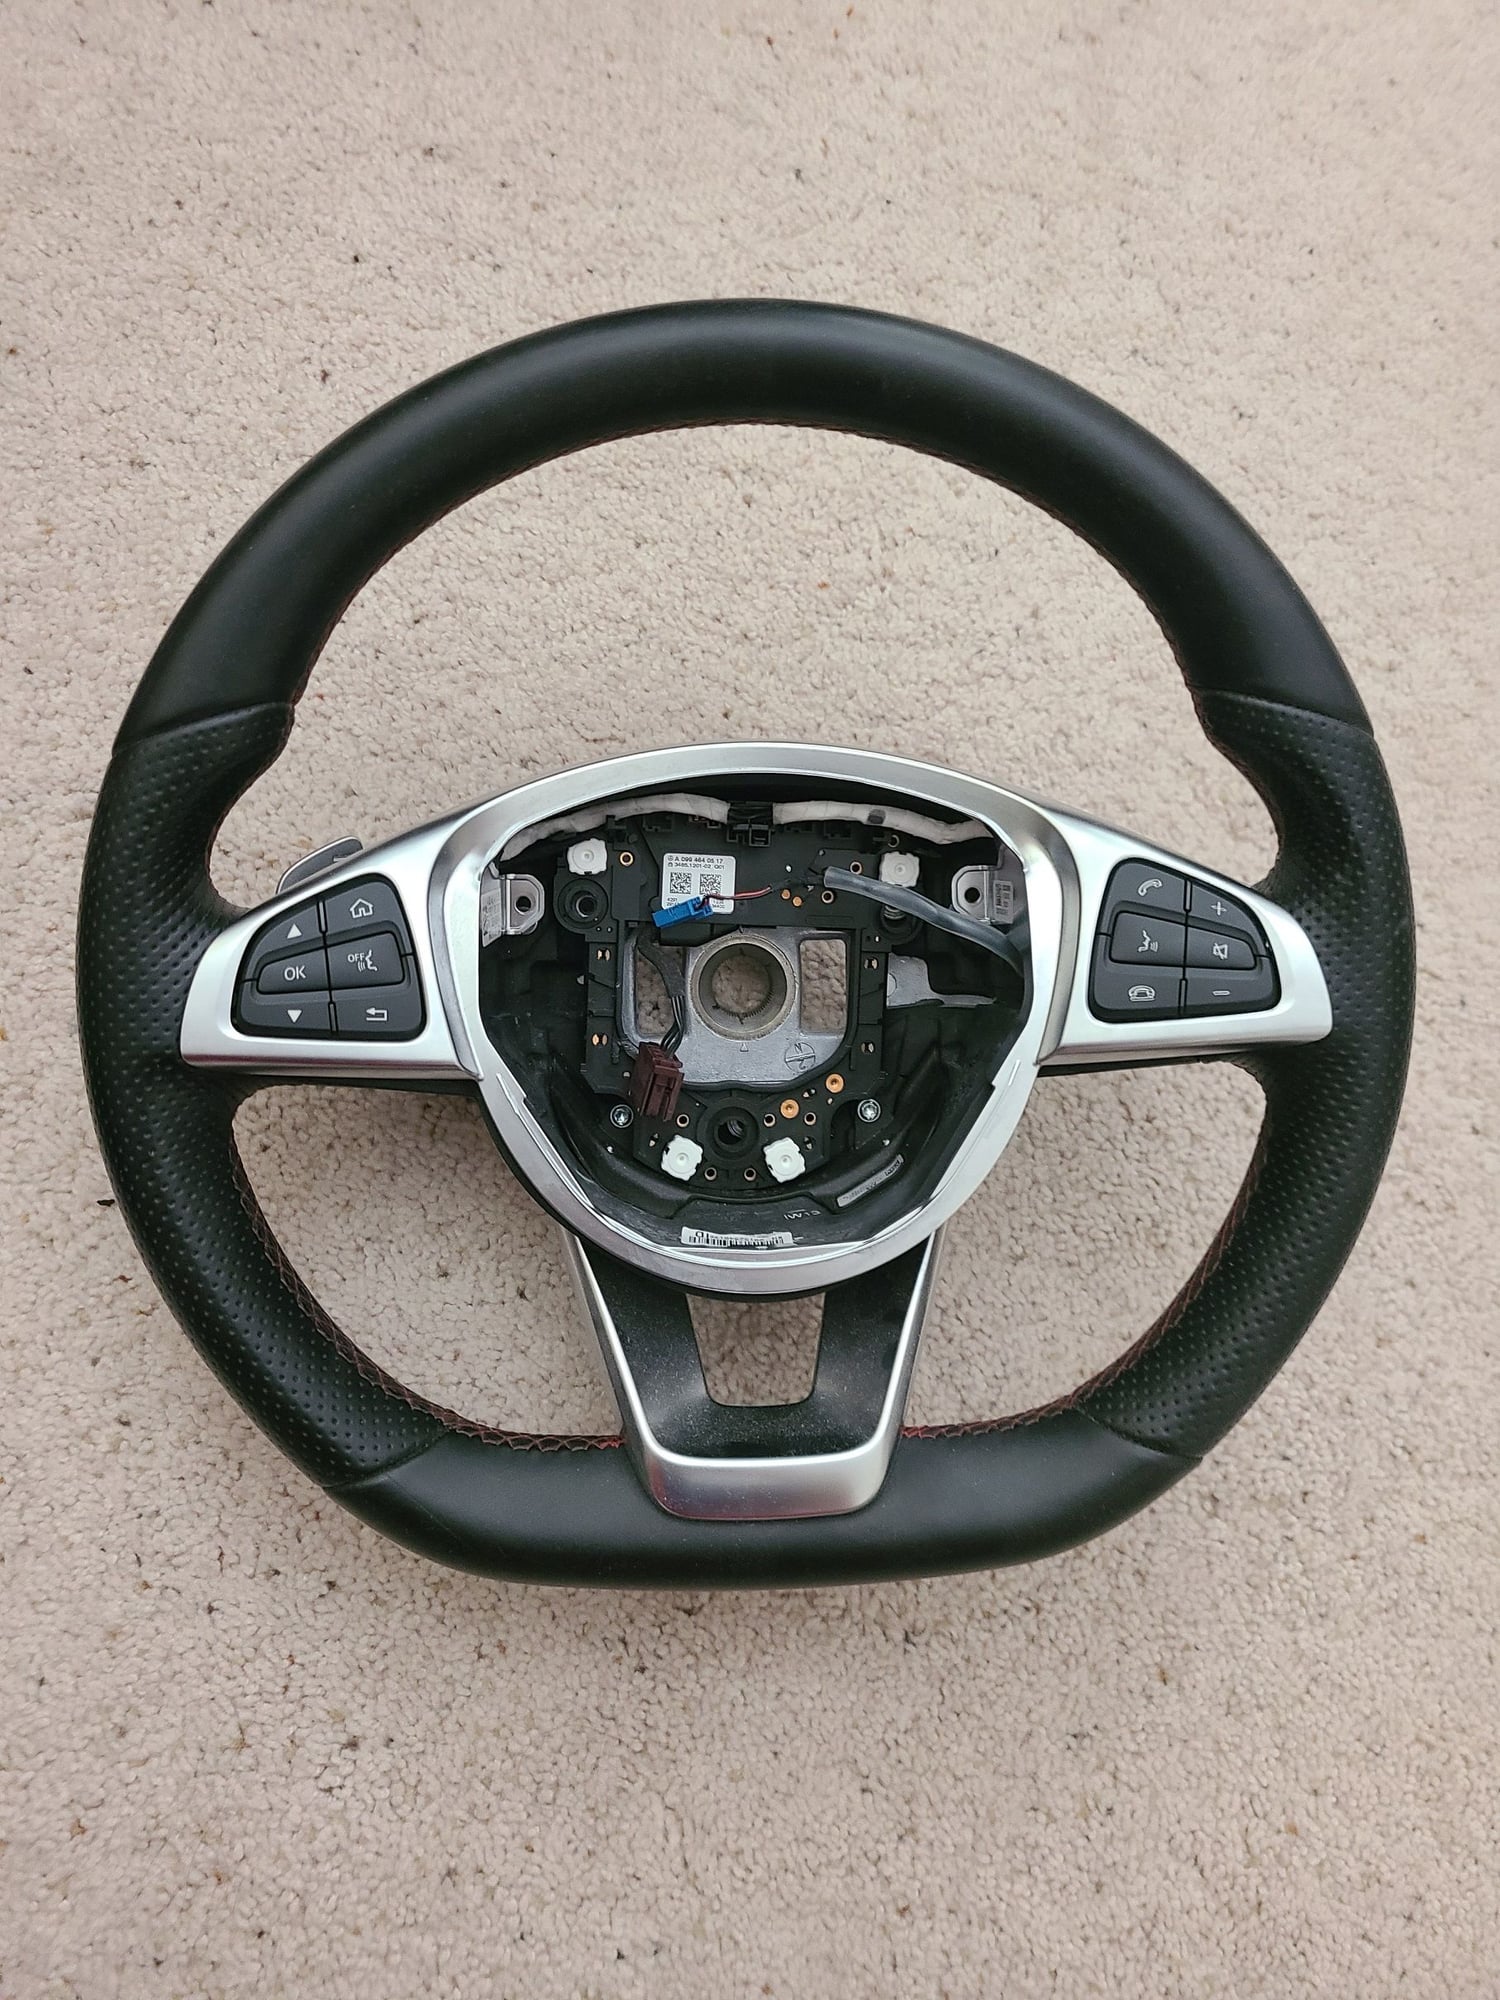 Interior/Upholstery - FS: Sport Steering wheel, red stitching W205 - Used - 2016 to 2018 Mercedes-Benz C450 AMG - Kennewick, WA 99336, United States